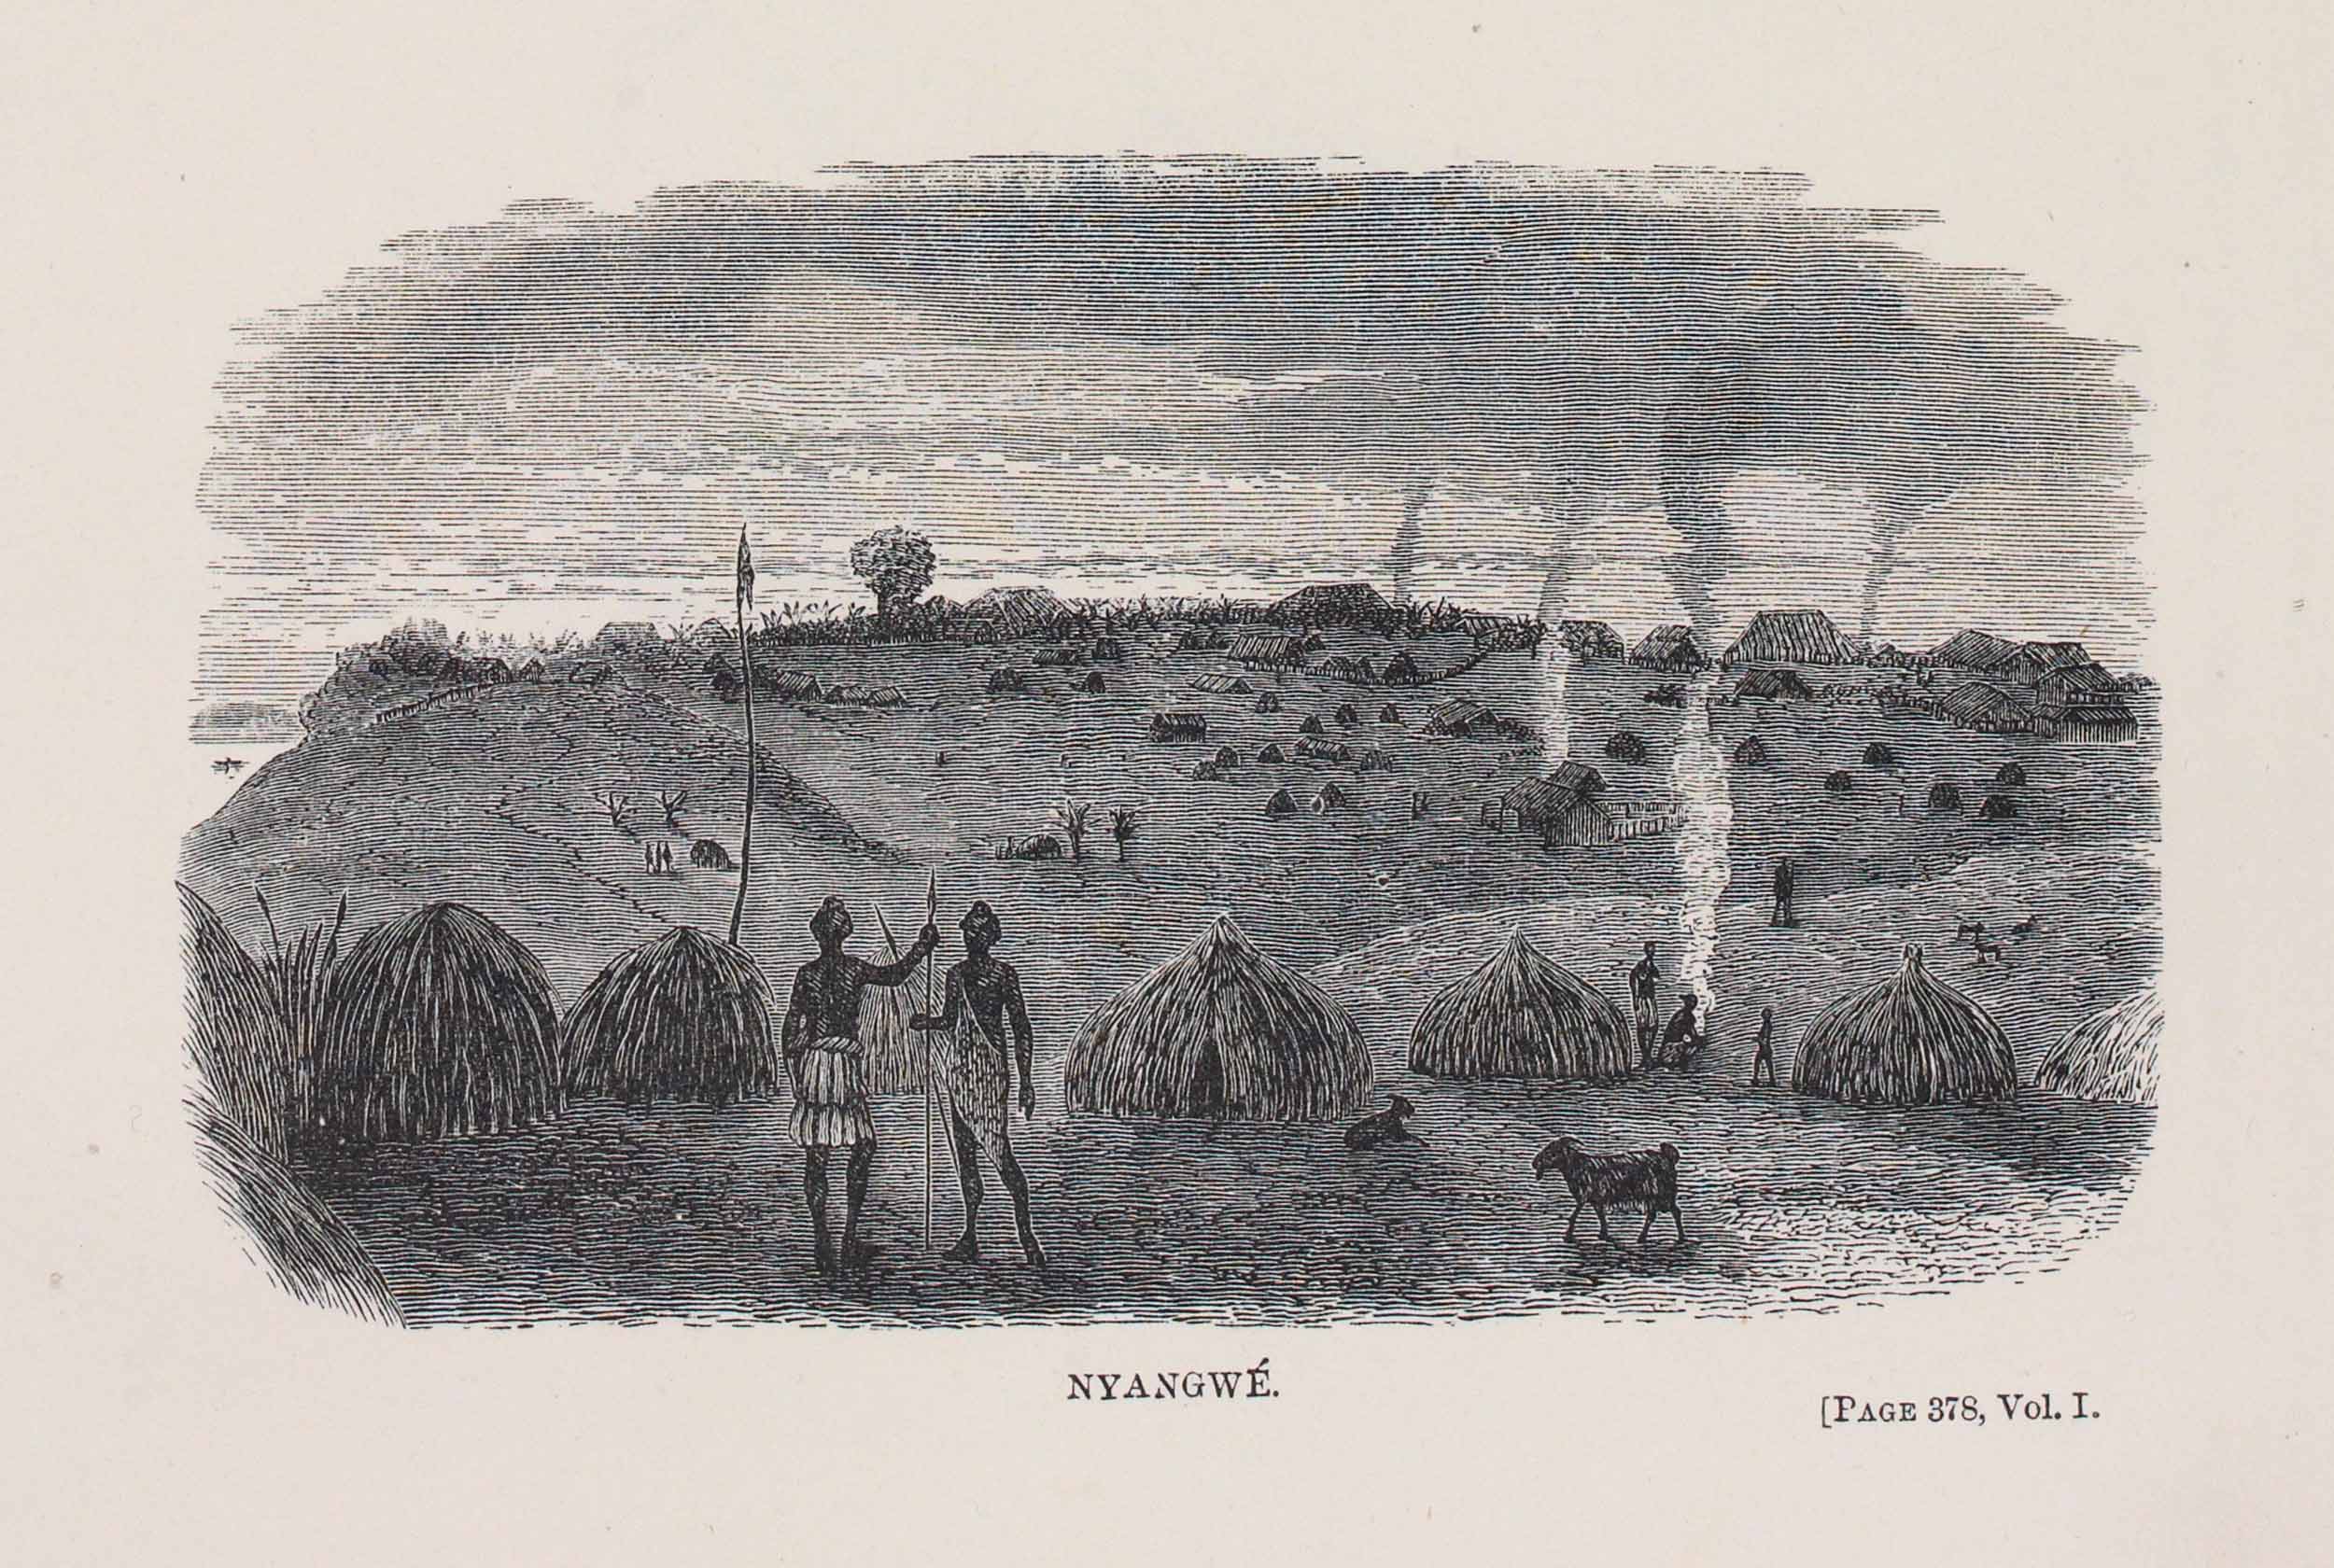 Nyangwe from Verney Lovett Cameron's Across Africa (1877,1:opposite 378).  Copyright National Library of Scotland. Creative Commons Share-alike 2.5 UK: Scotland (https://creativecommons.org/licenses/by-nc-sa/2.5/scotland/).